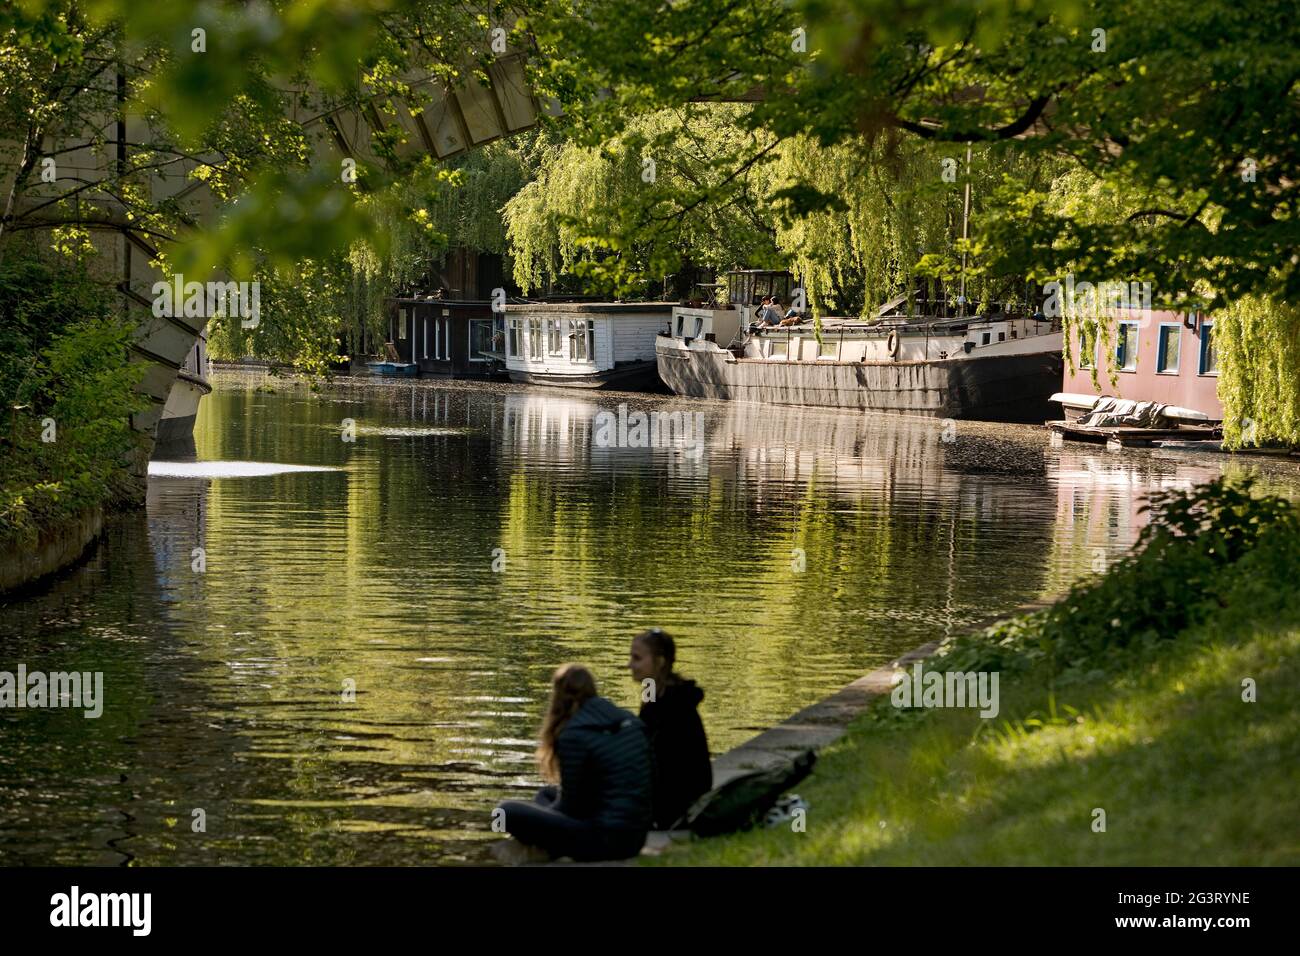 recreation at the Lower Lock Landwehr Canal with viaduct, Tiergarten, Germany, Berlin Stock Photo